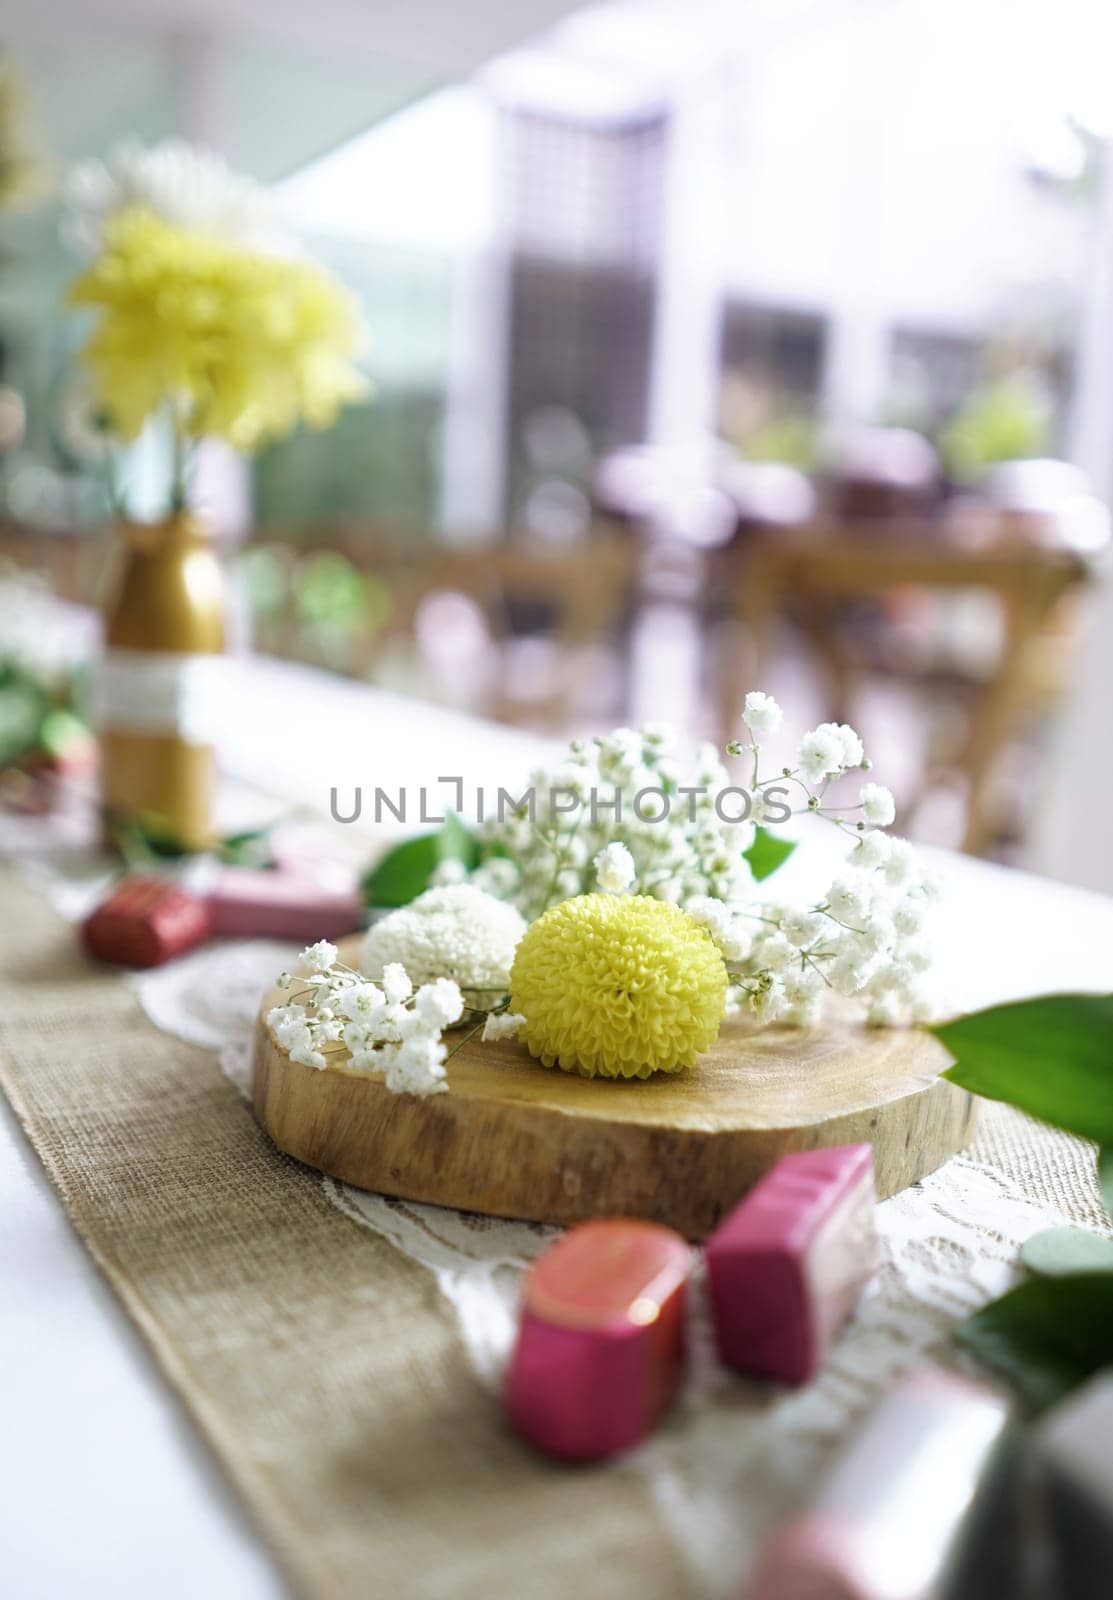 Party decorations setup, nice and beautiful interior decorations for party with several ornaments